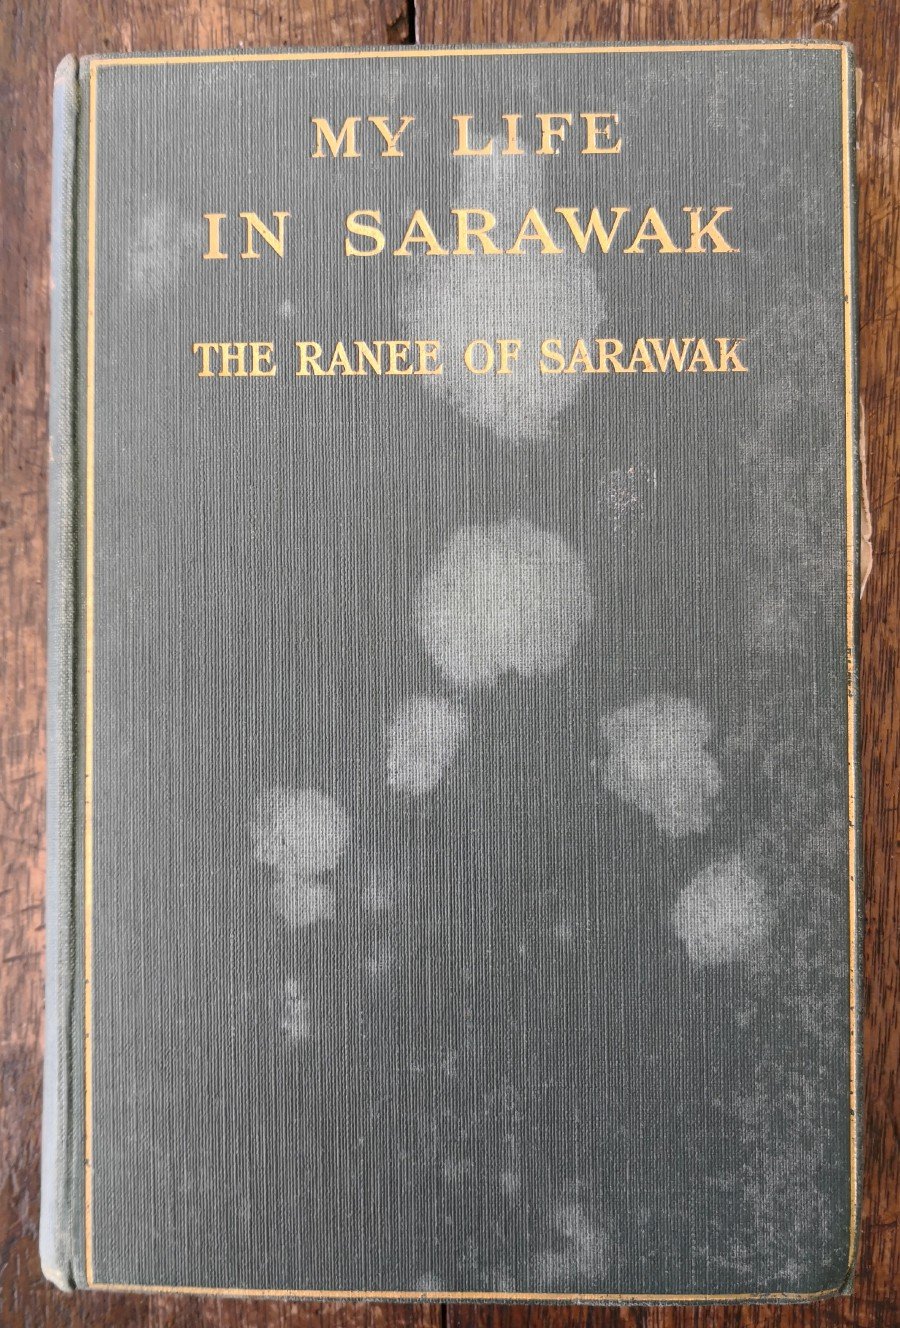 My Life In Sarawak was published in 1913.